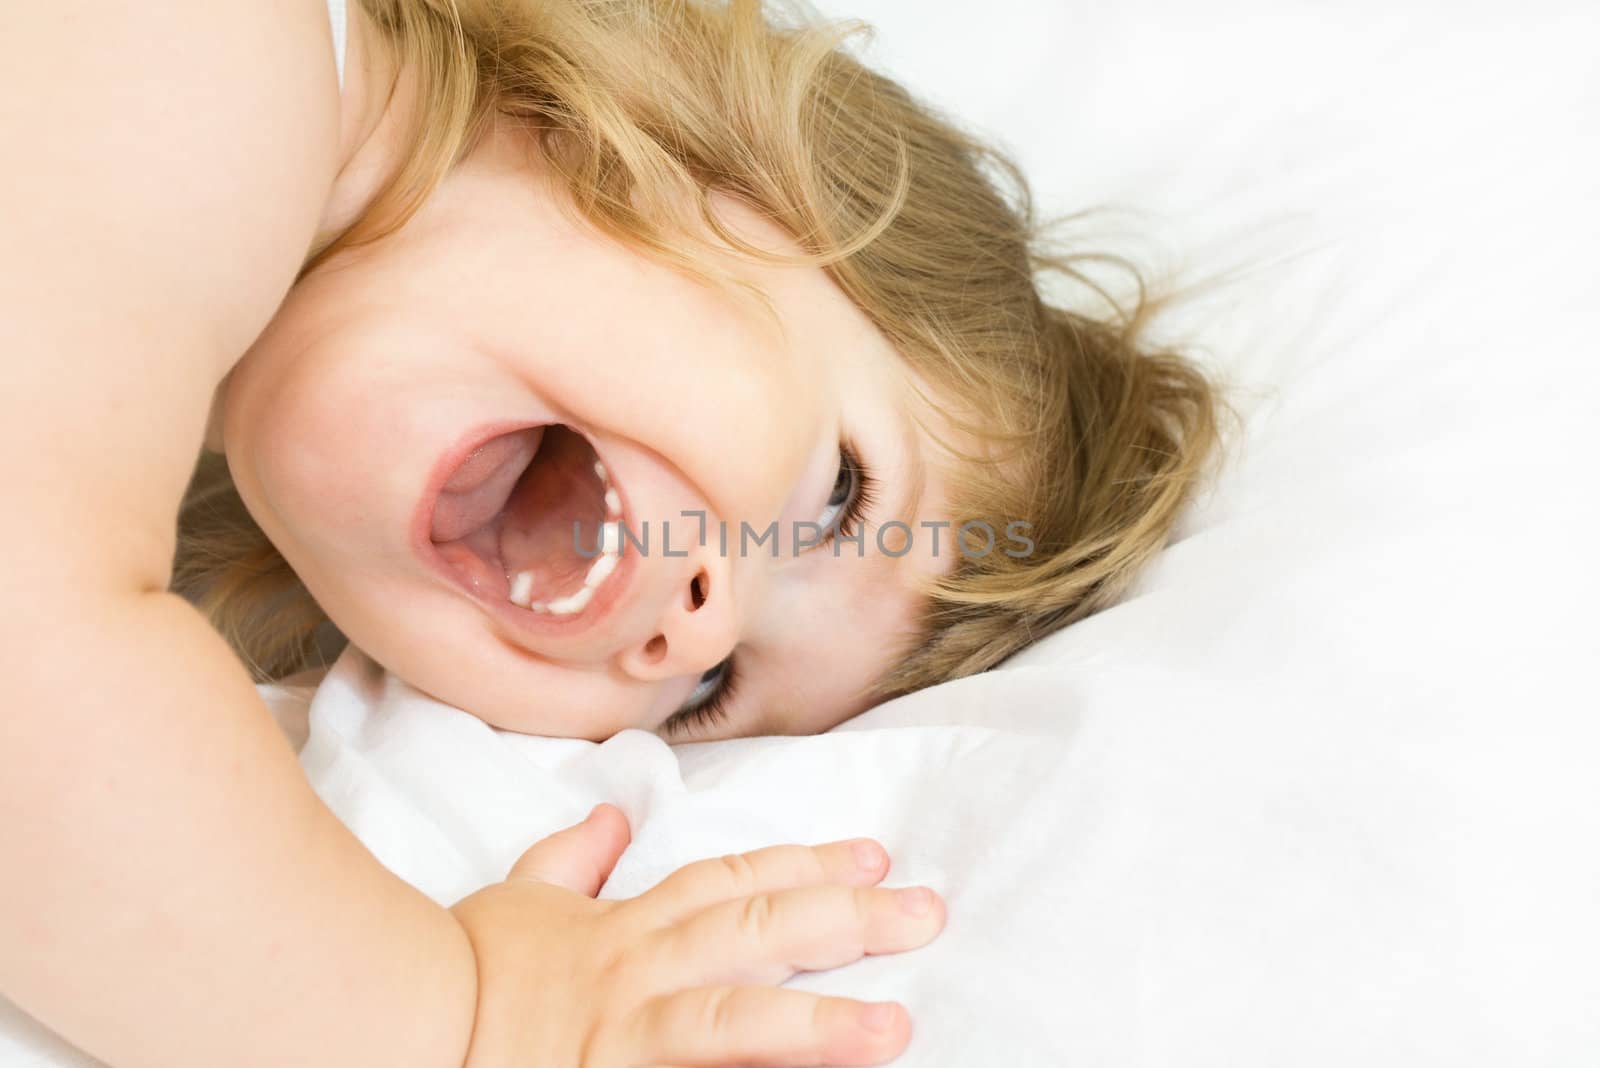 Smiling little girl on a bed